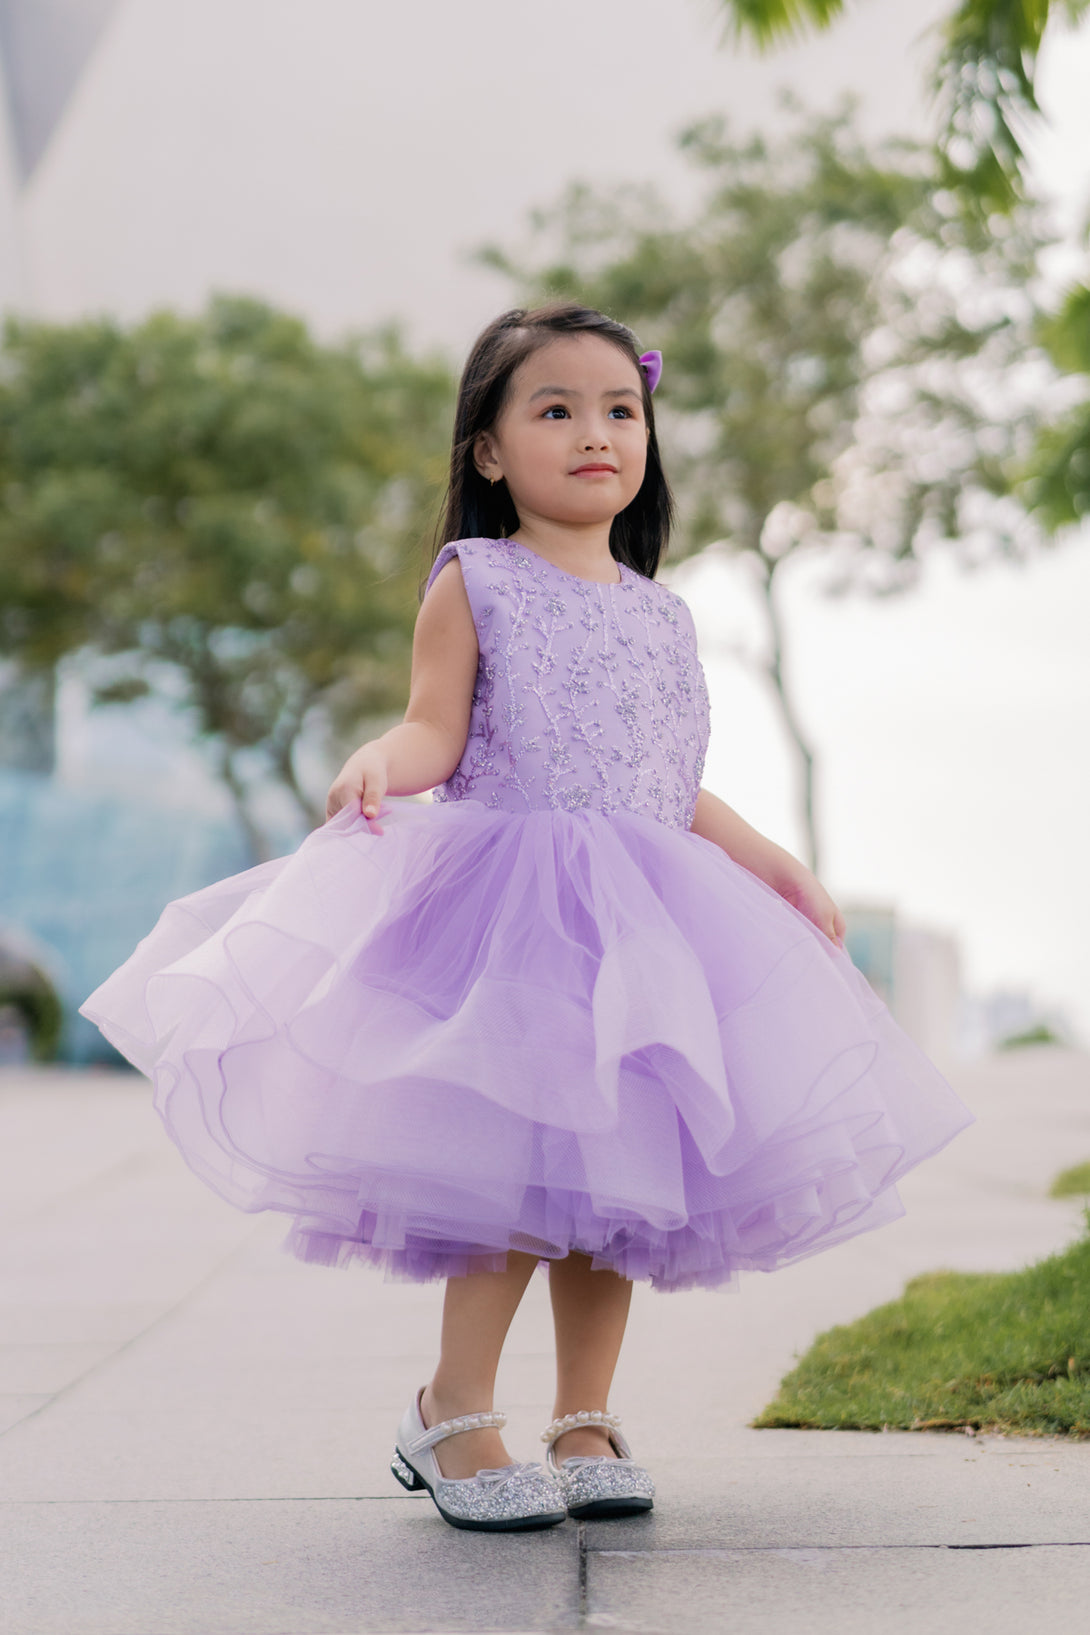 150 Most Adorable Baby Girl TuTu Dress of All Times - YouTube